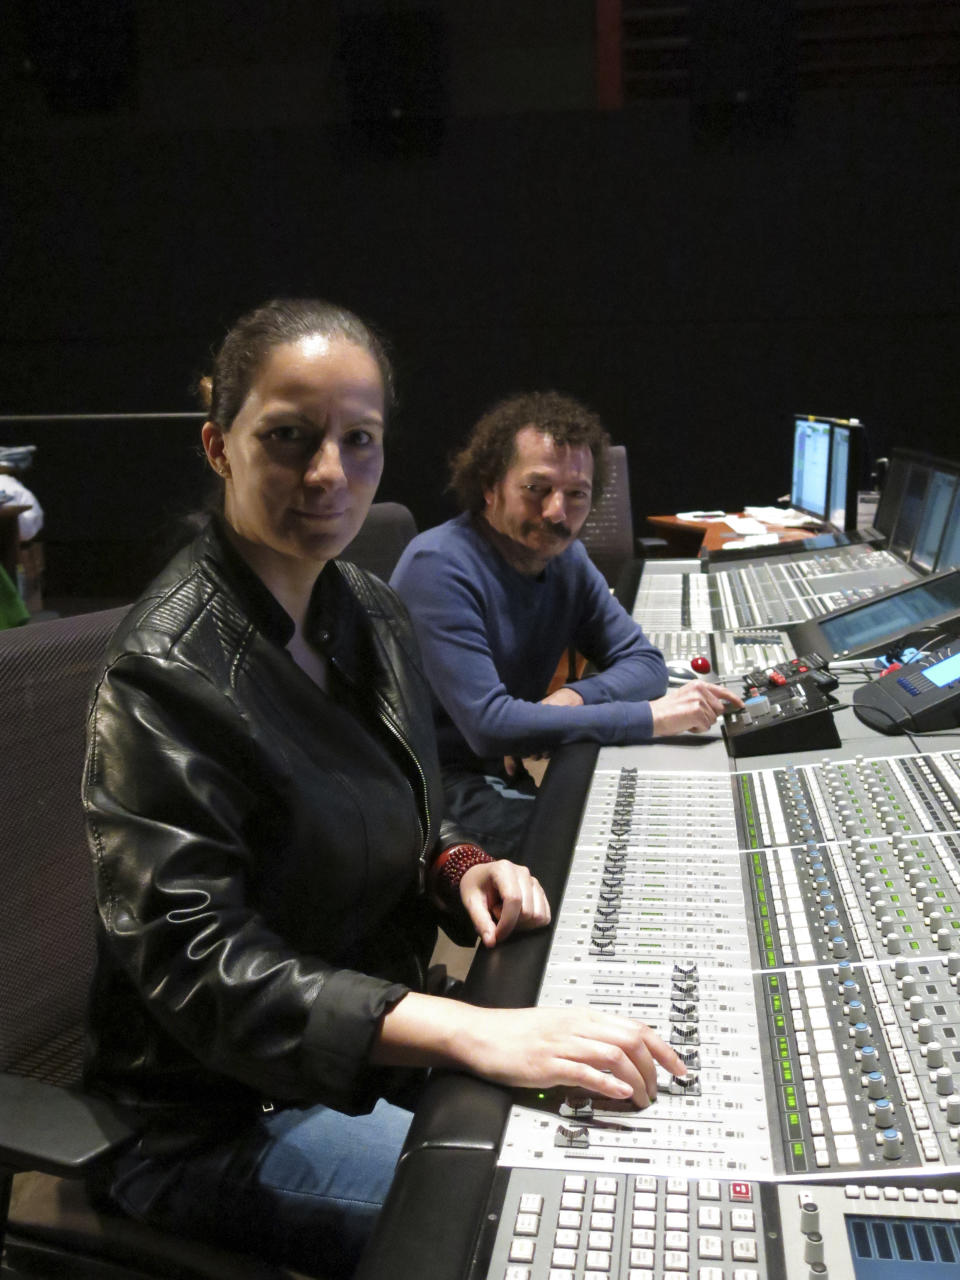 Mexican sound engineers Michelle Couttolenc, left, and Jaime Baksht pose in a sound studio in Mexico City, March 18, 2021. The Oscar-nominated movie “Sound of Metal,” about a heavy metal drummer that starts going deaf, has three Mexican sound engineers nominated for best sound, Couttolenc and Baksht. (AP Photo/Berenice Bautista)